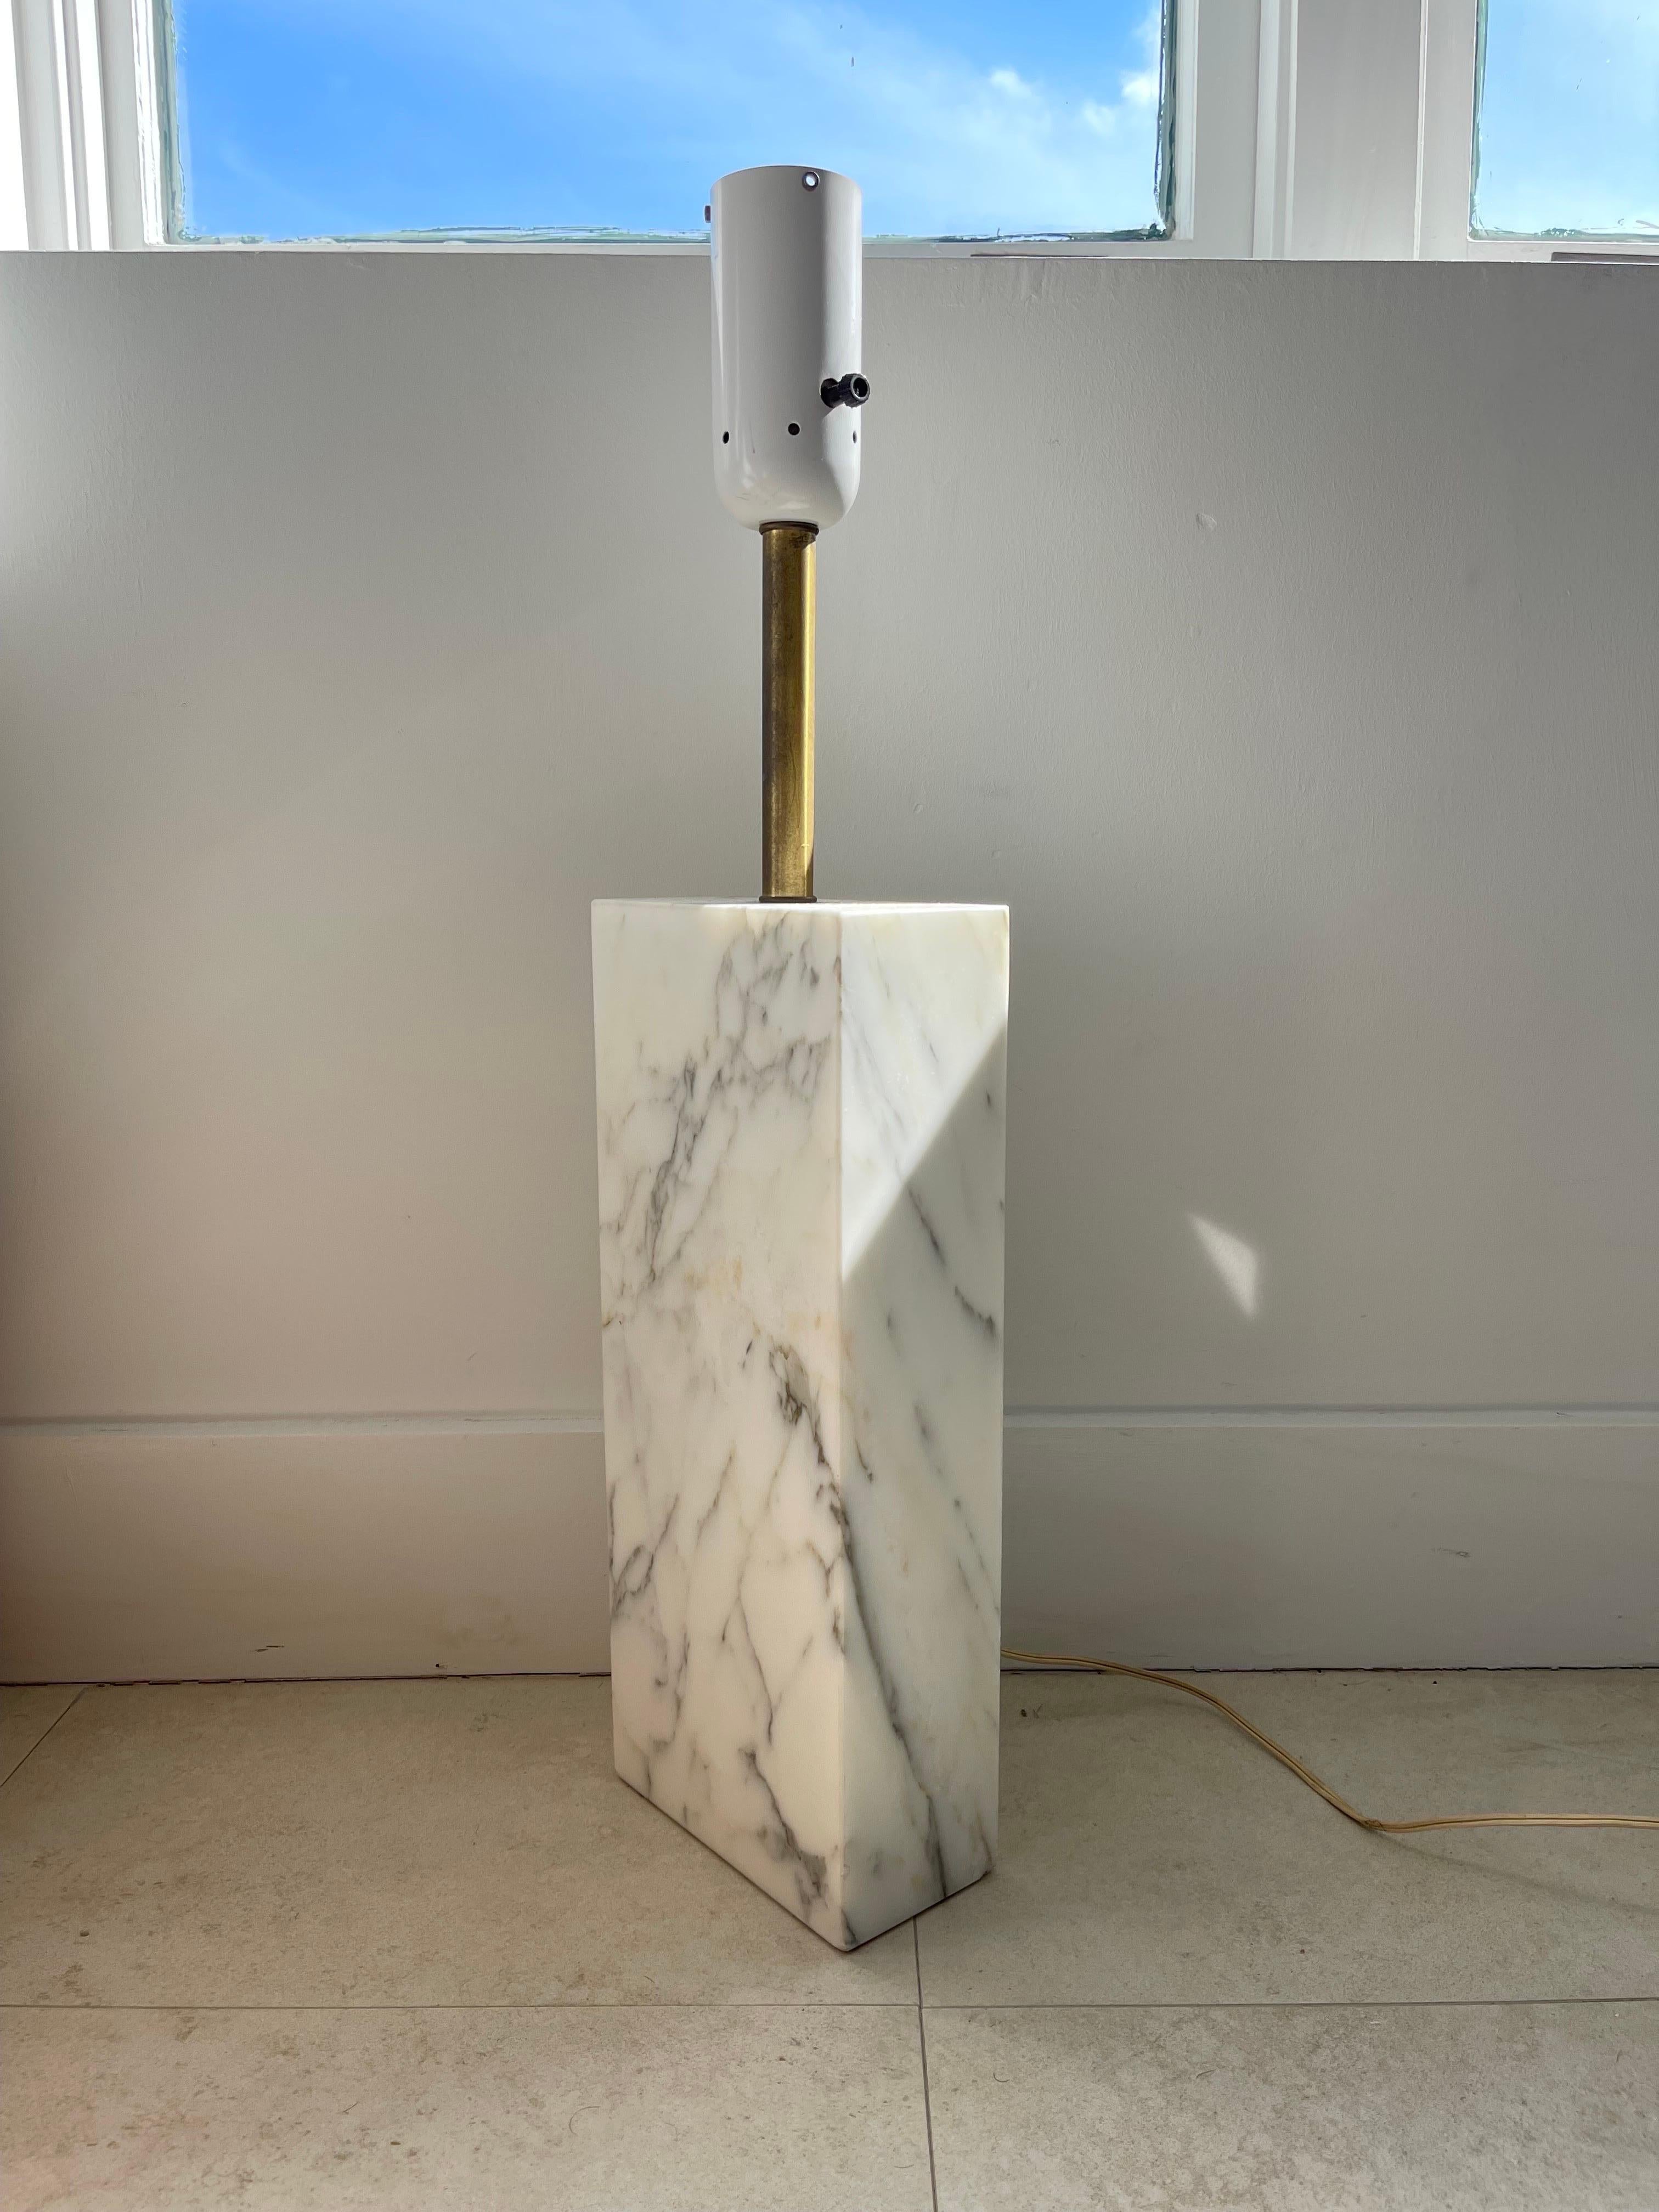 Polished Monolithic Elizabeth Kauffer Statuary Marble Table Lamp for Nessen Studio, 1950s For Sale